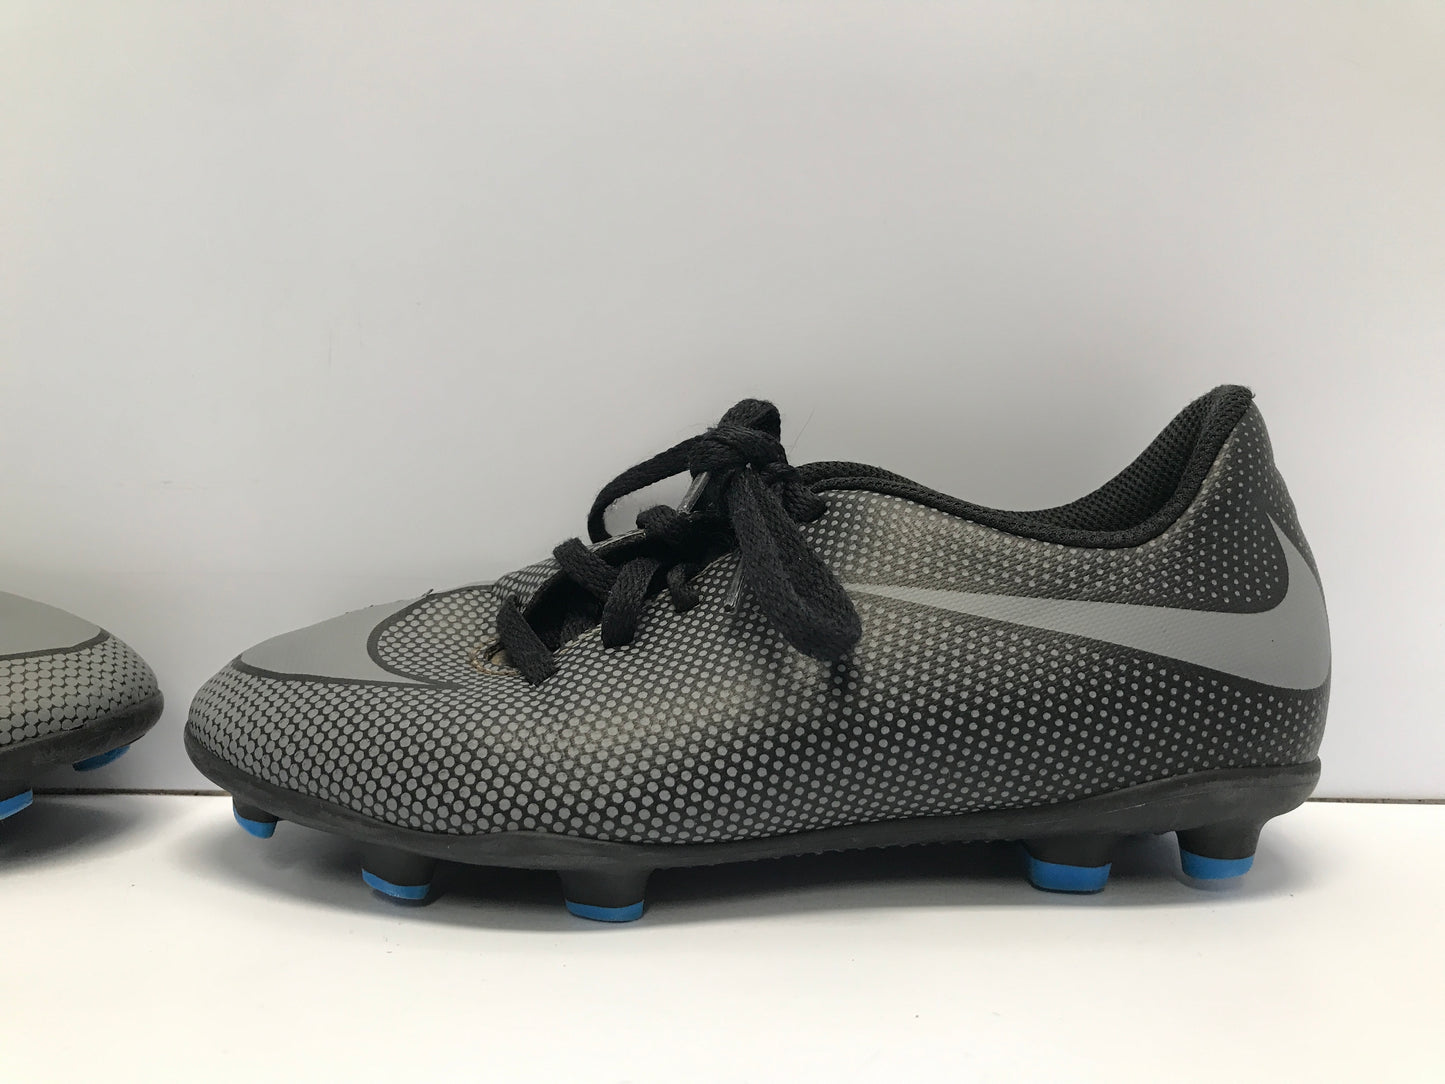 Soccer Shoes Cleats Child Size 2 Nike Grey Black Excellent